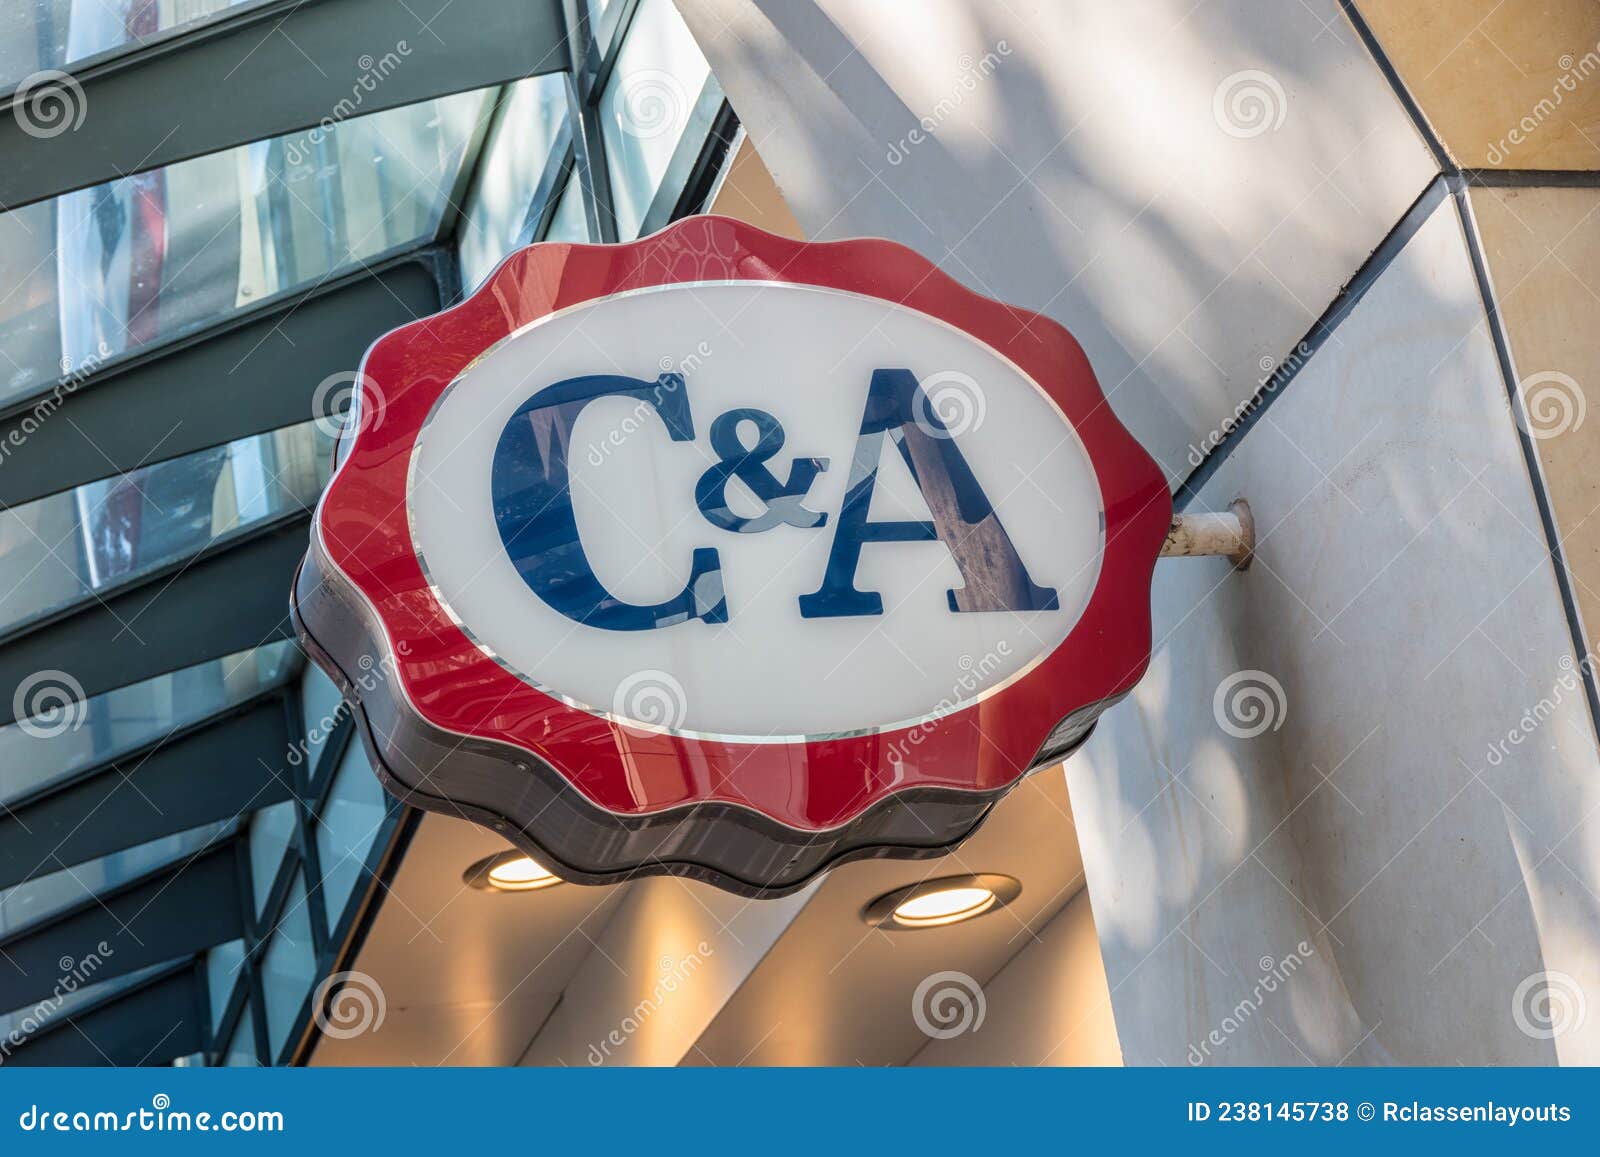 COLOGNE, GERMANY OCTOBER, 2017: C&a Store Sign. C&a is an International ...